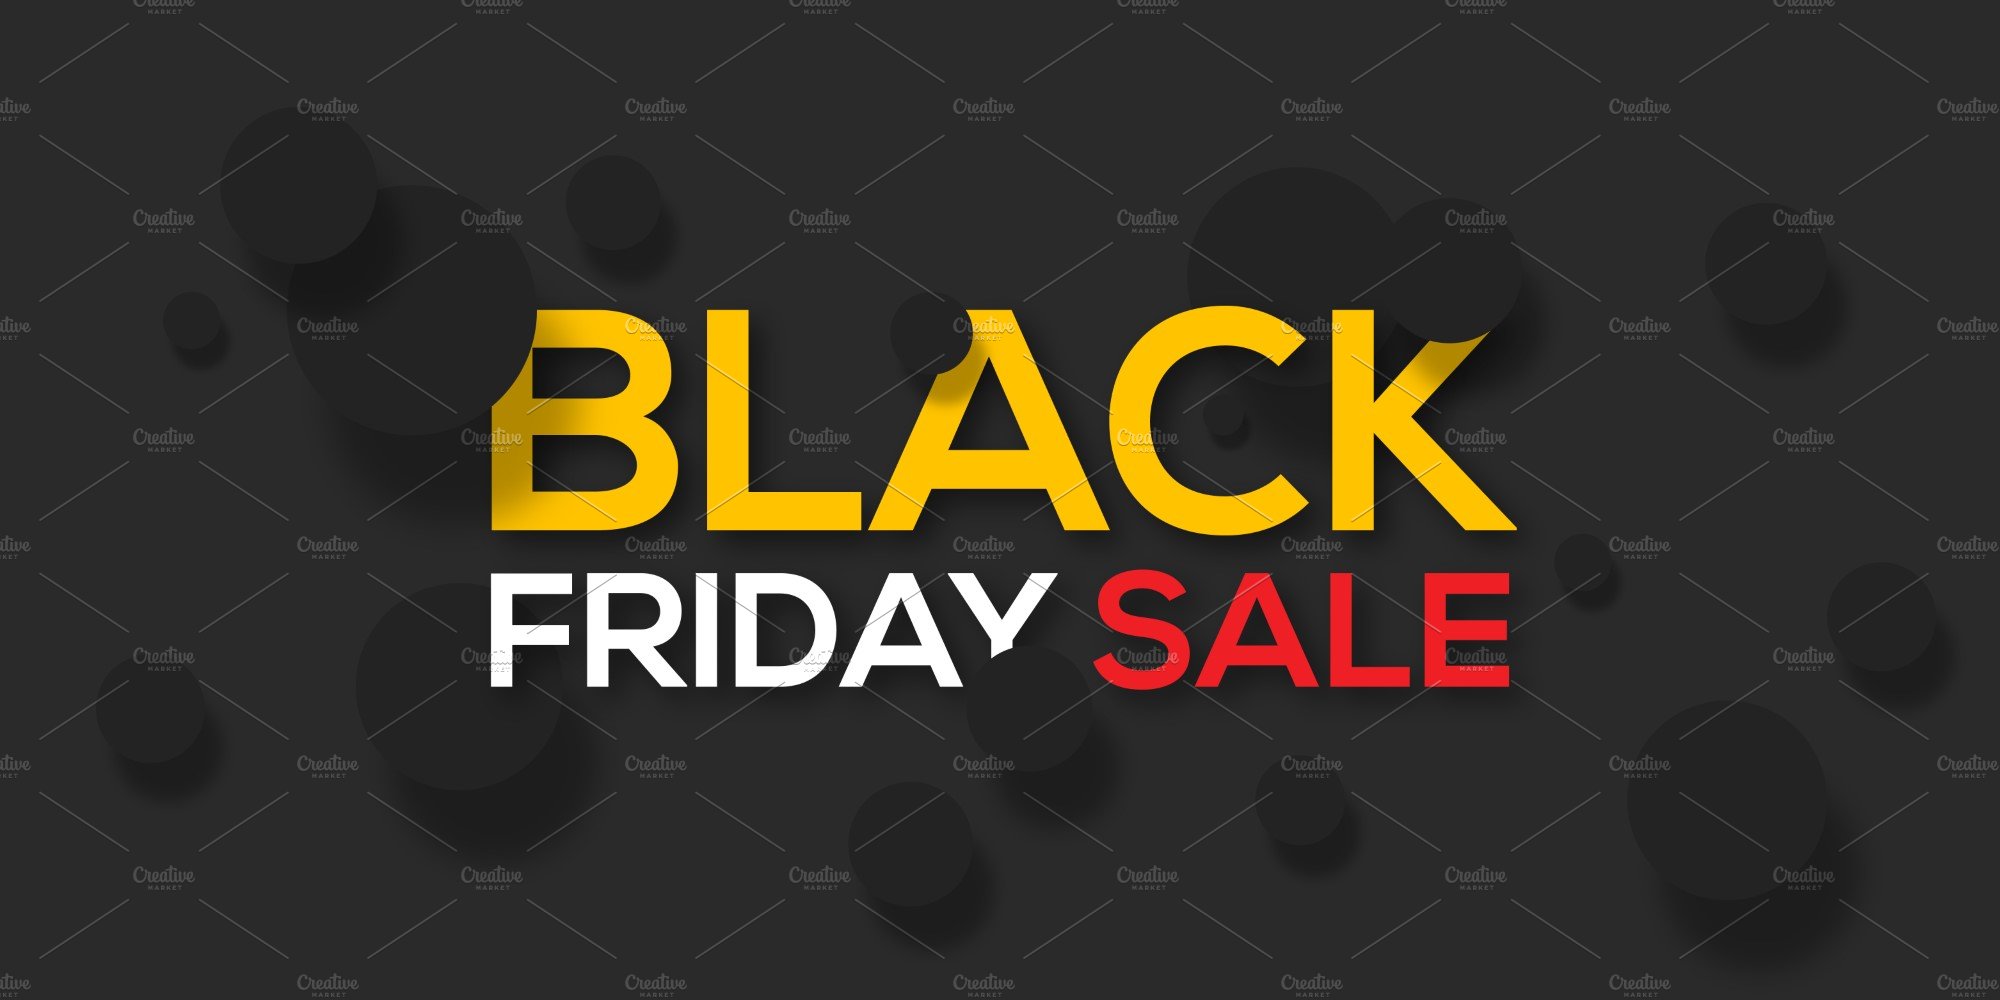 Classic Black Friday banner with three colored font.